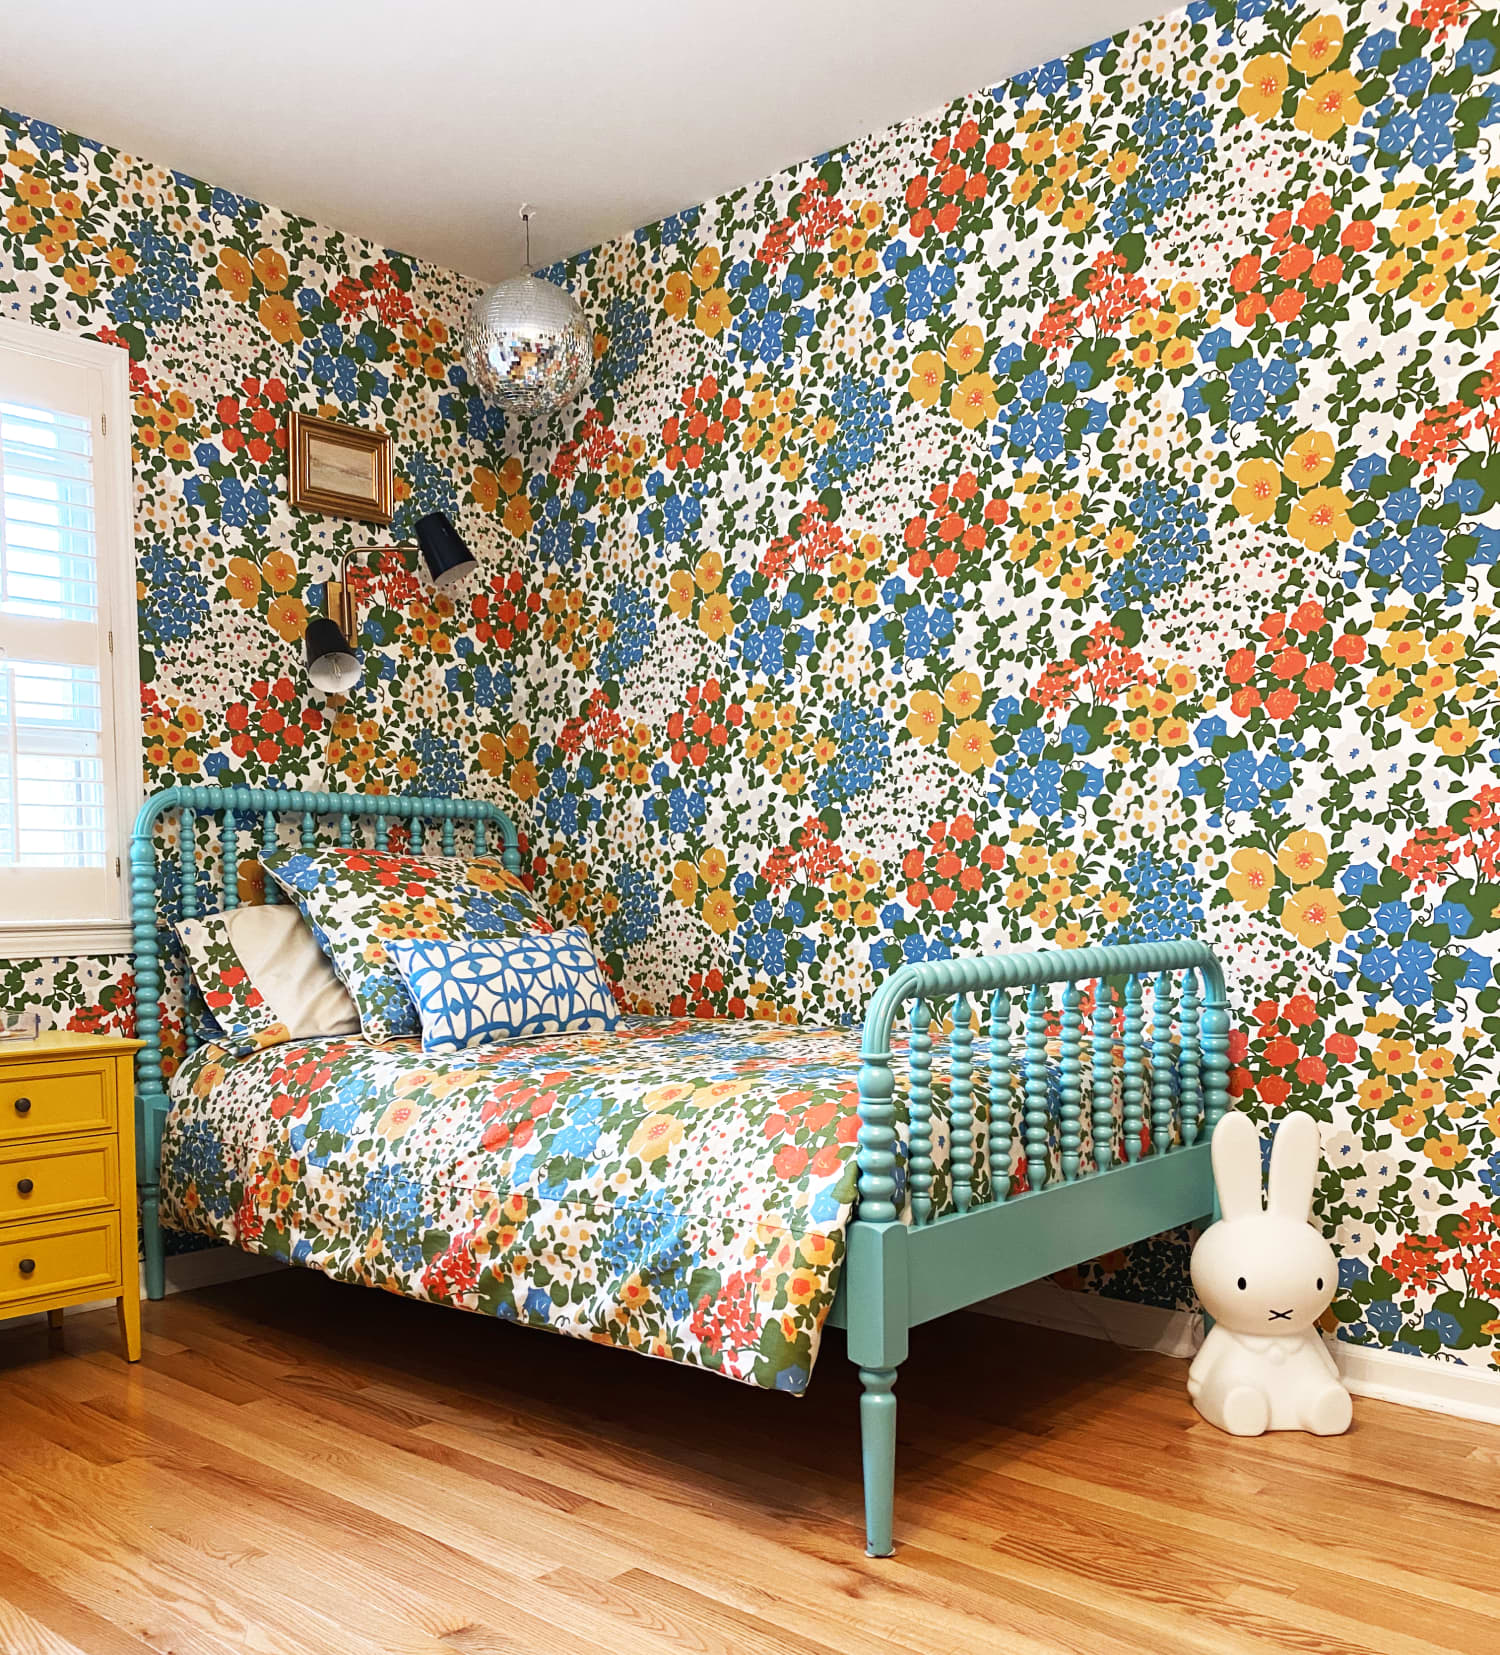 A Tween Bedroom Transforms With a Rich Floral Wallpaper | Apartment Therapy